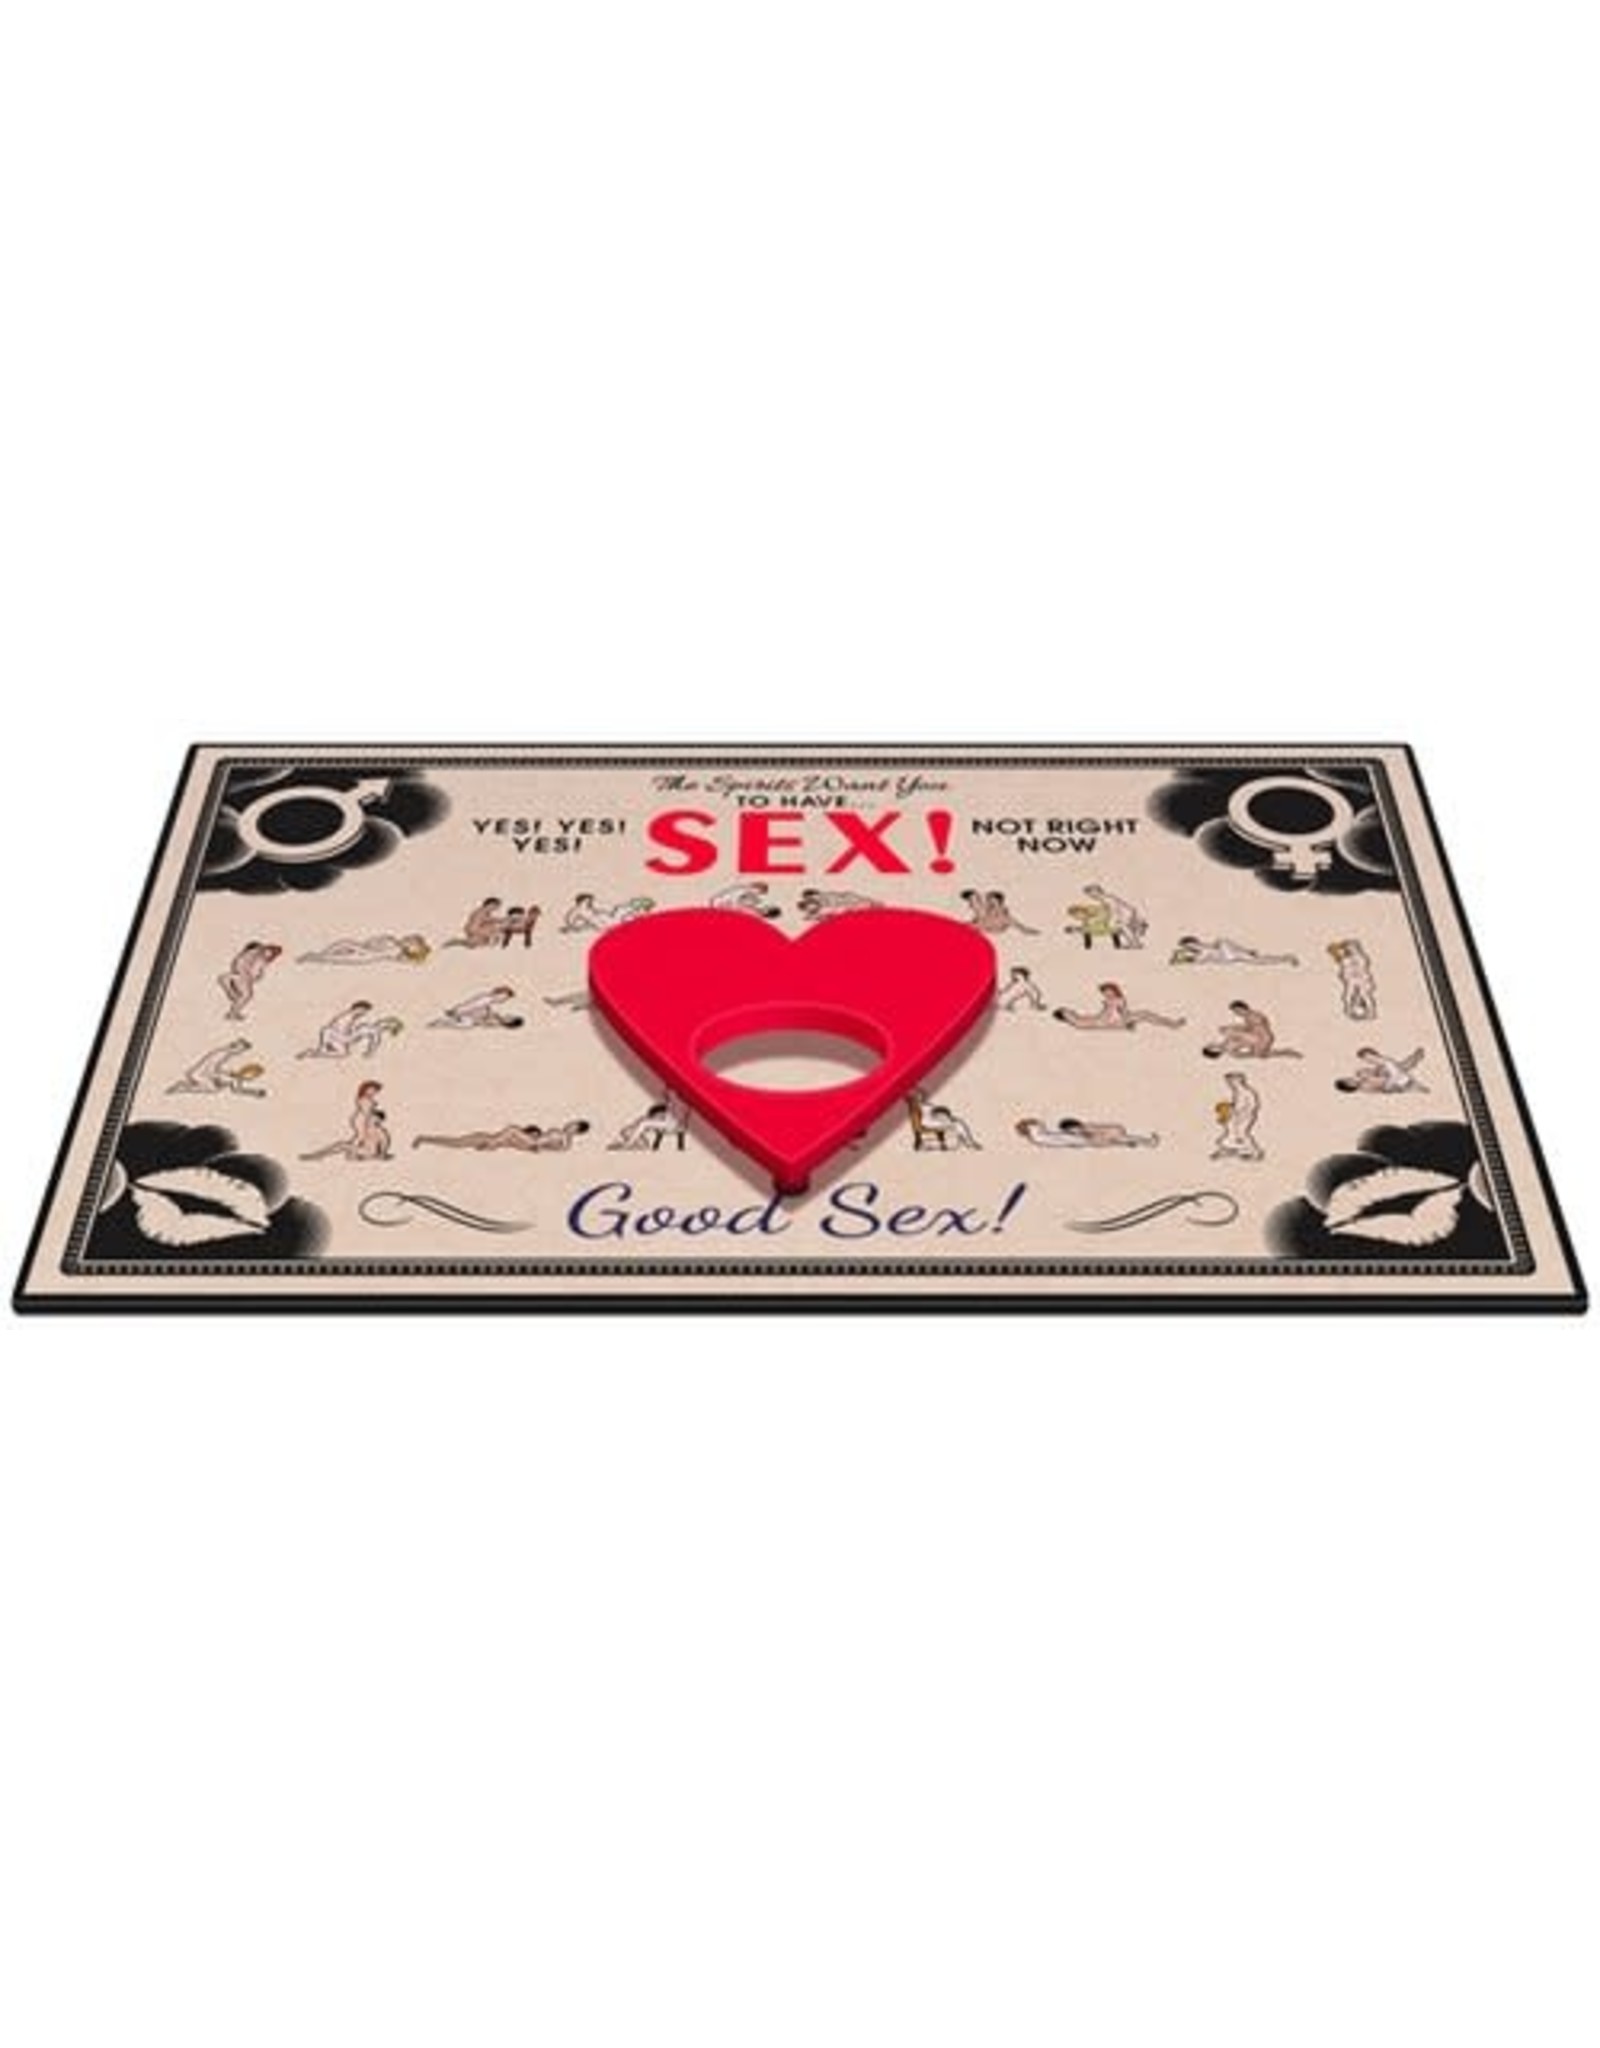 Kheper Games The Spirits Want You to Have Sex! Game